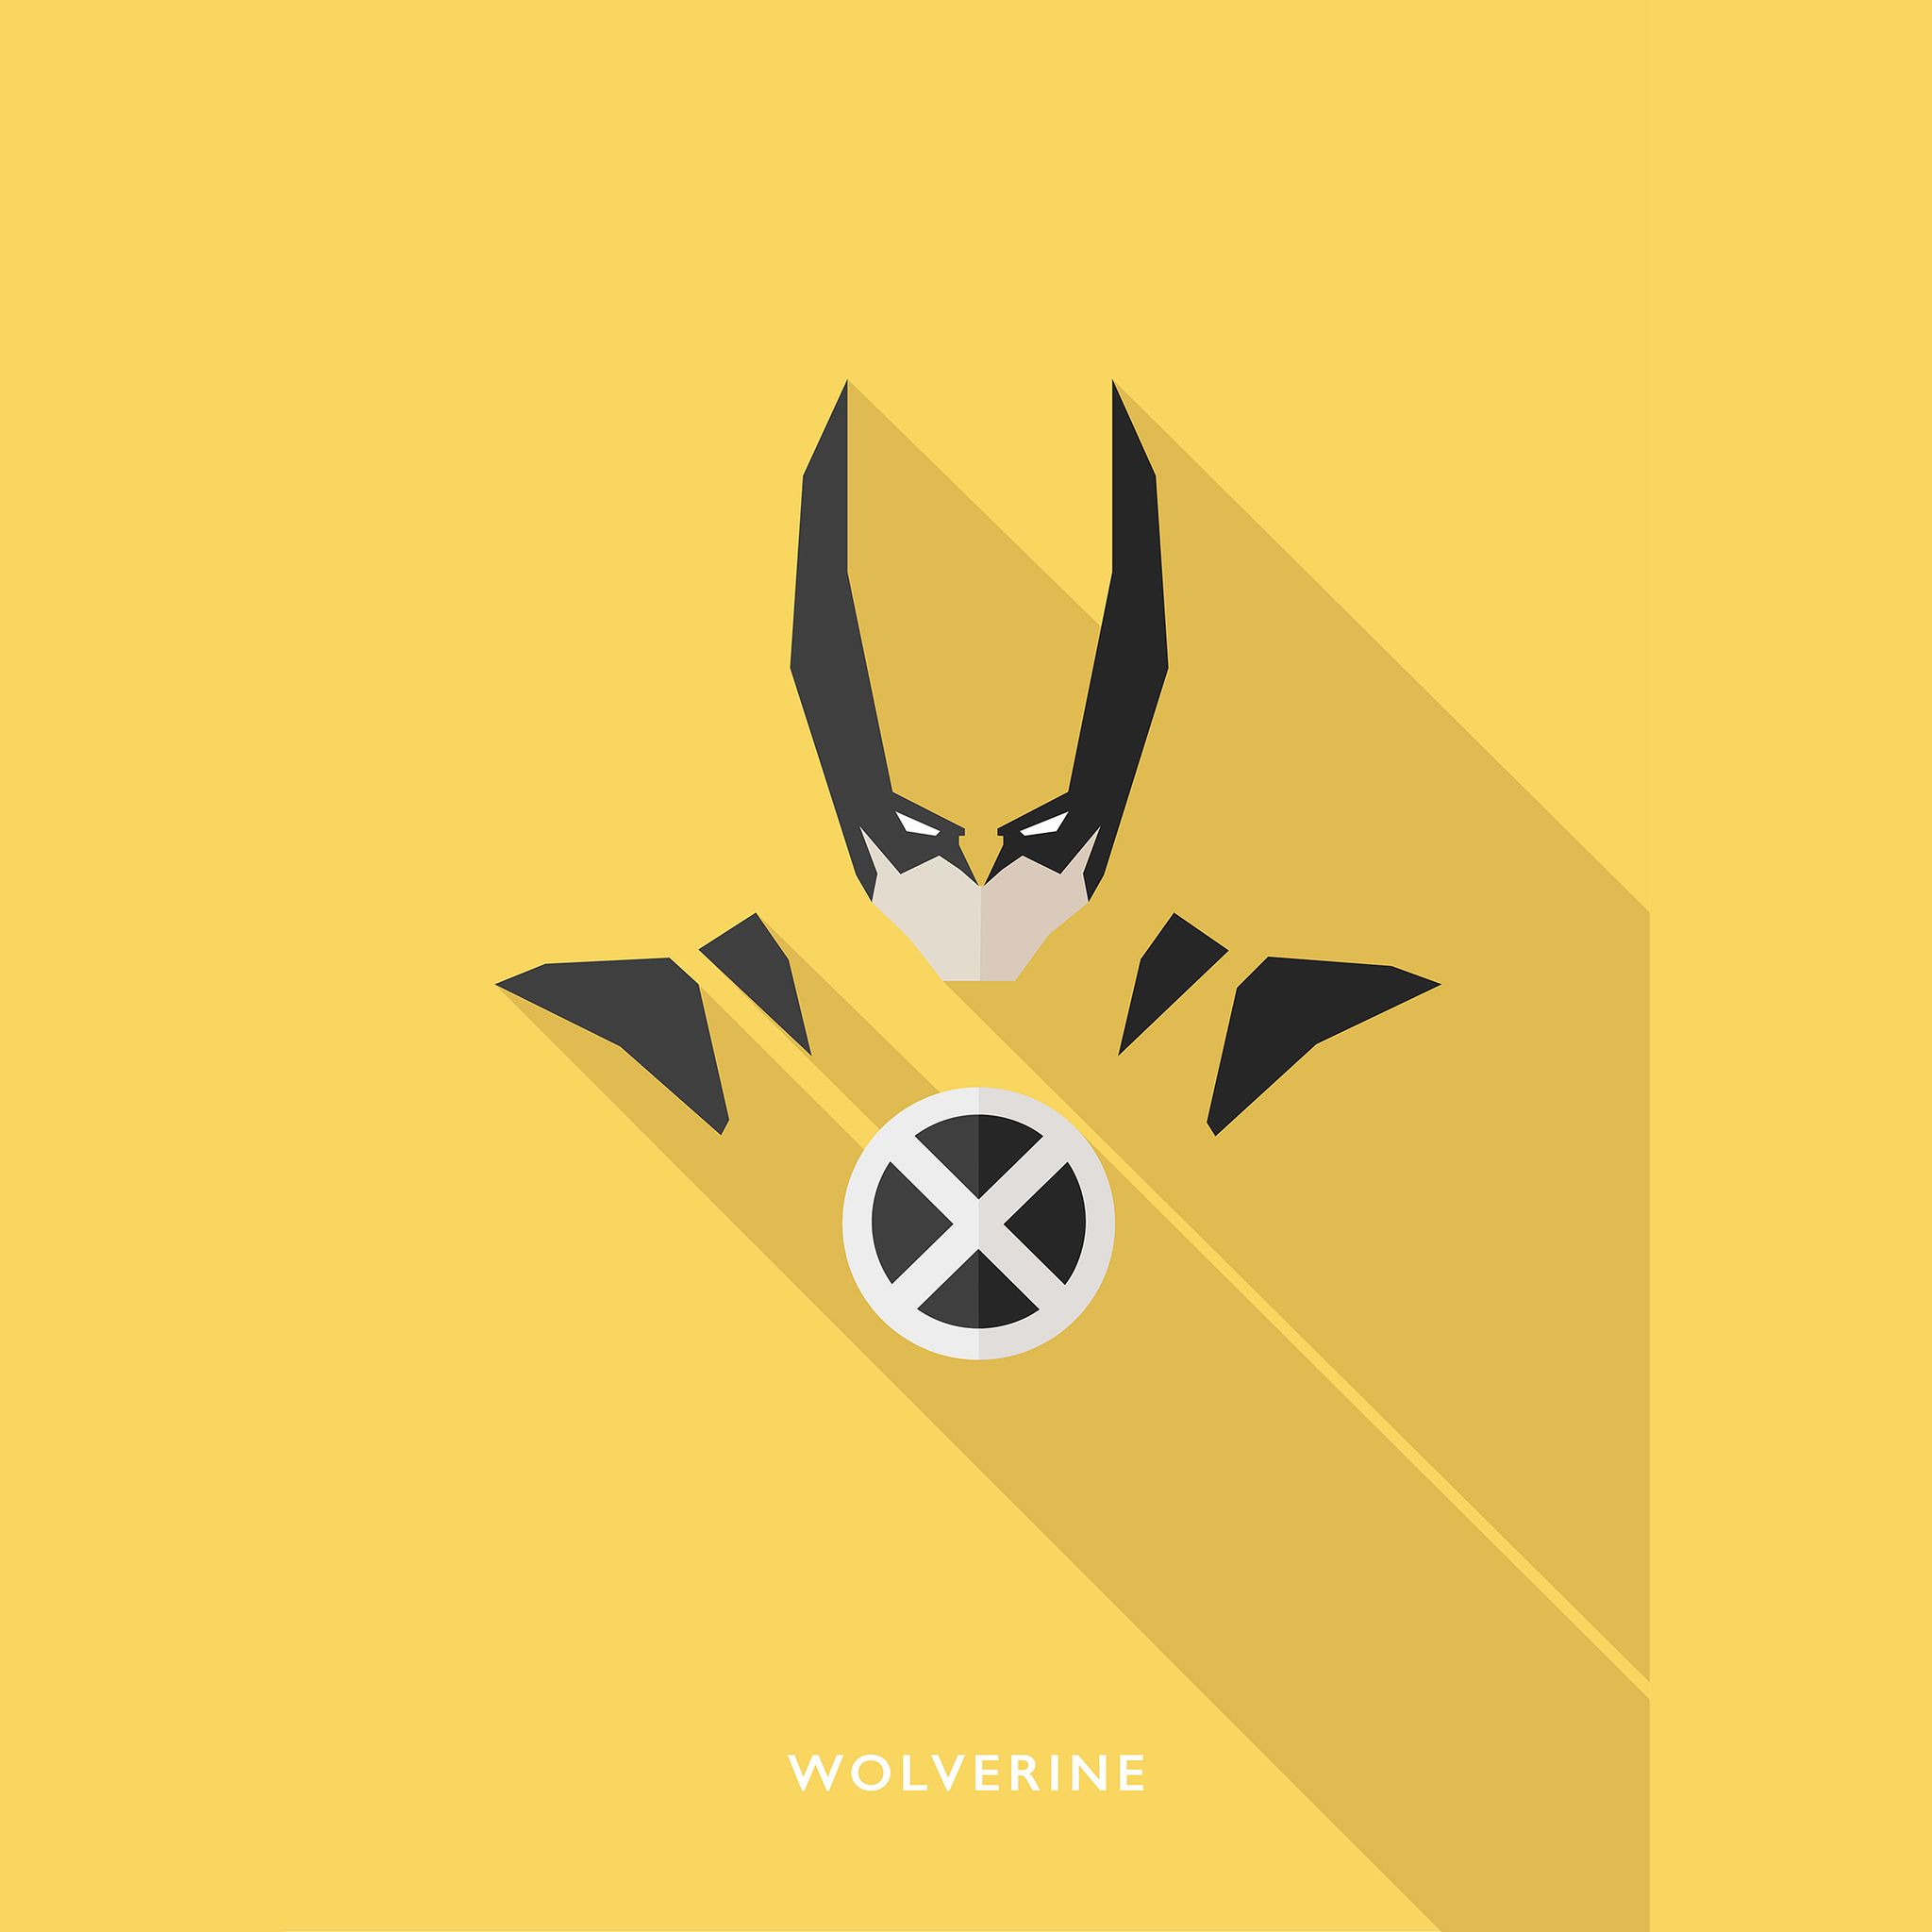 Wolverine Minimalist 4k iPad Air HD 4k Wallpaper, Image, Background, Photo and Picture